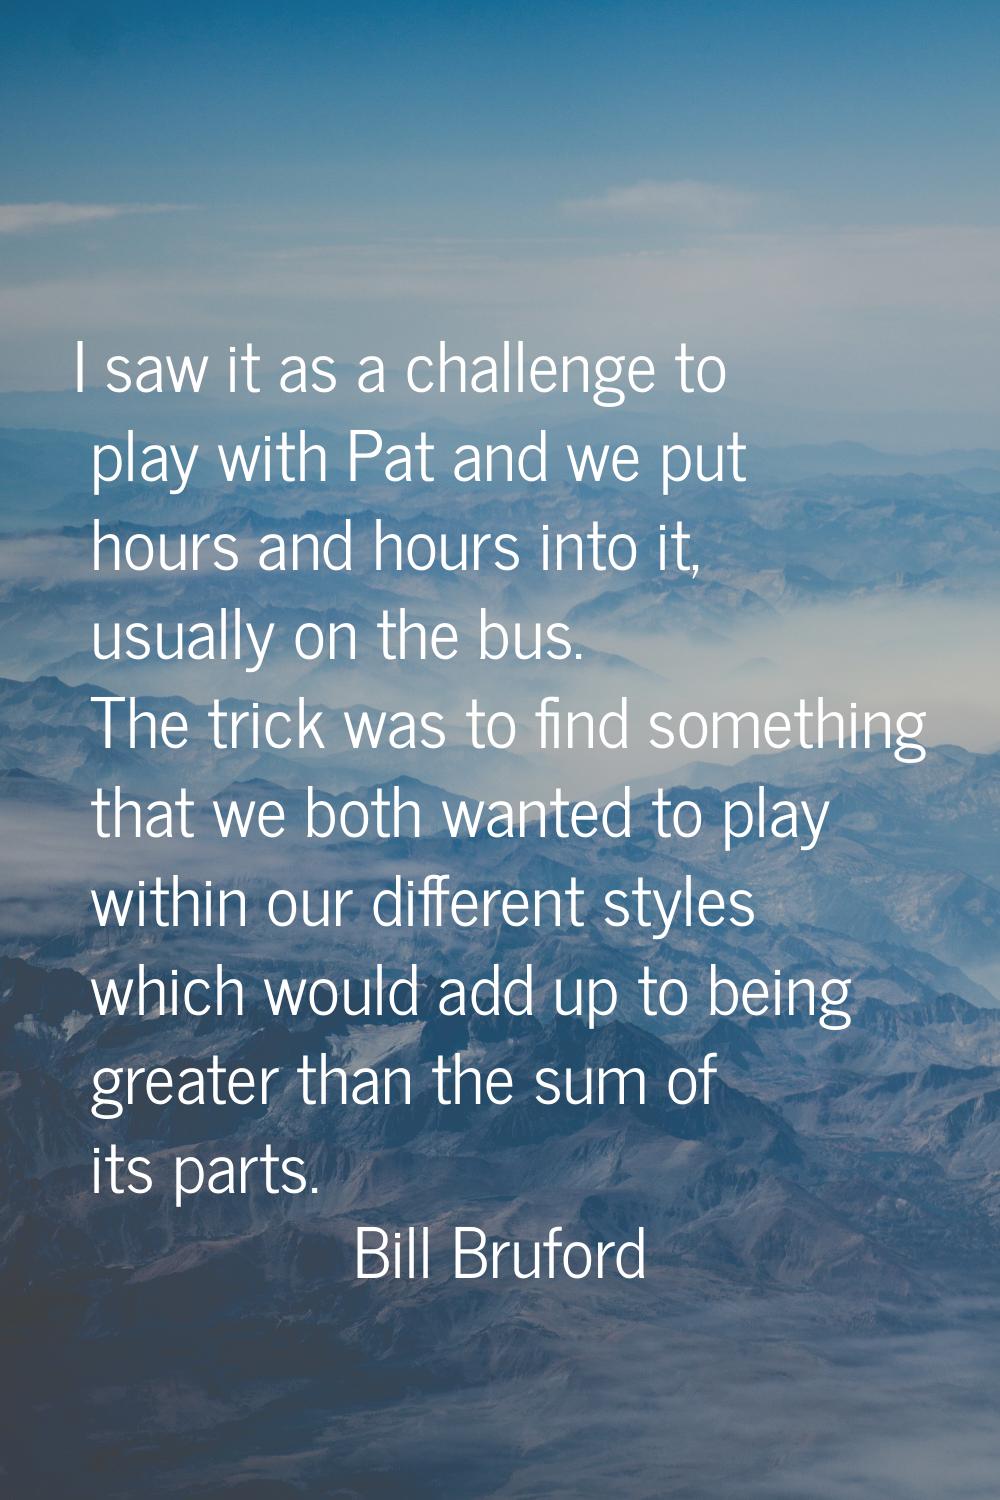 I saw it as a challenge to play with Pat and we put hours and hours into it, usually on the bus. Th